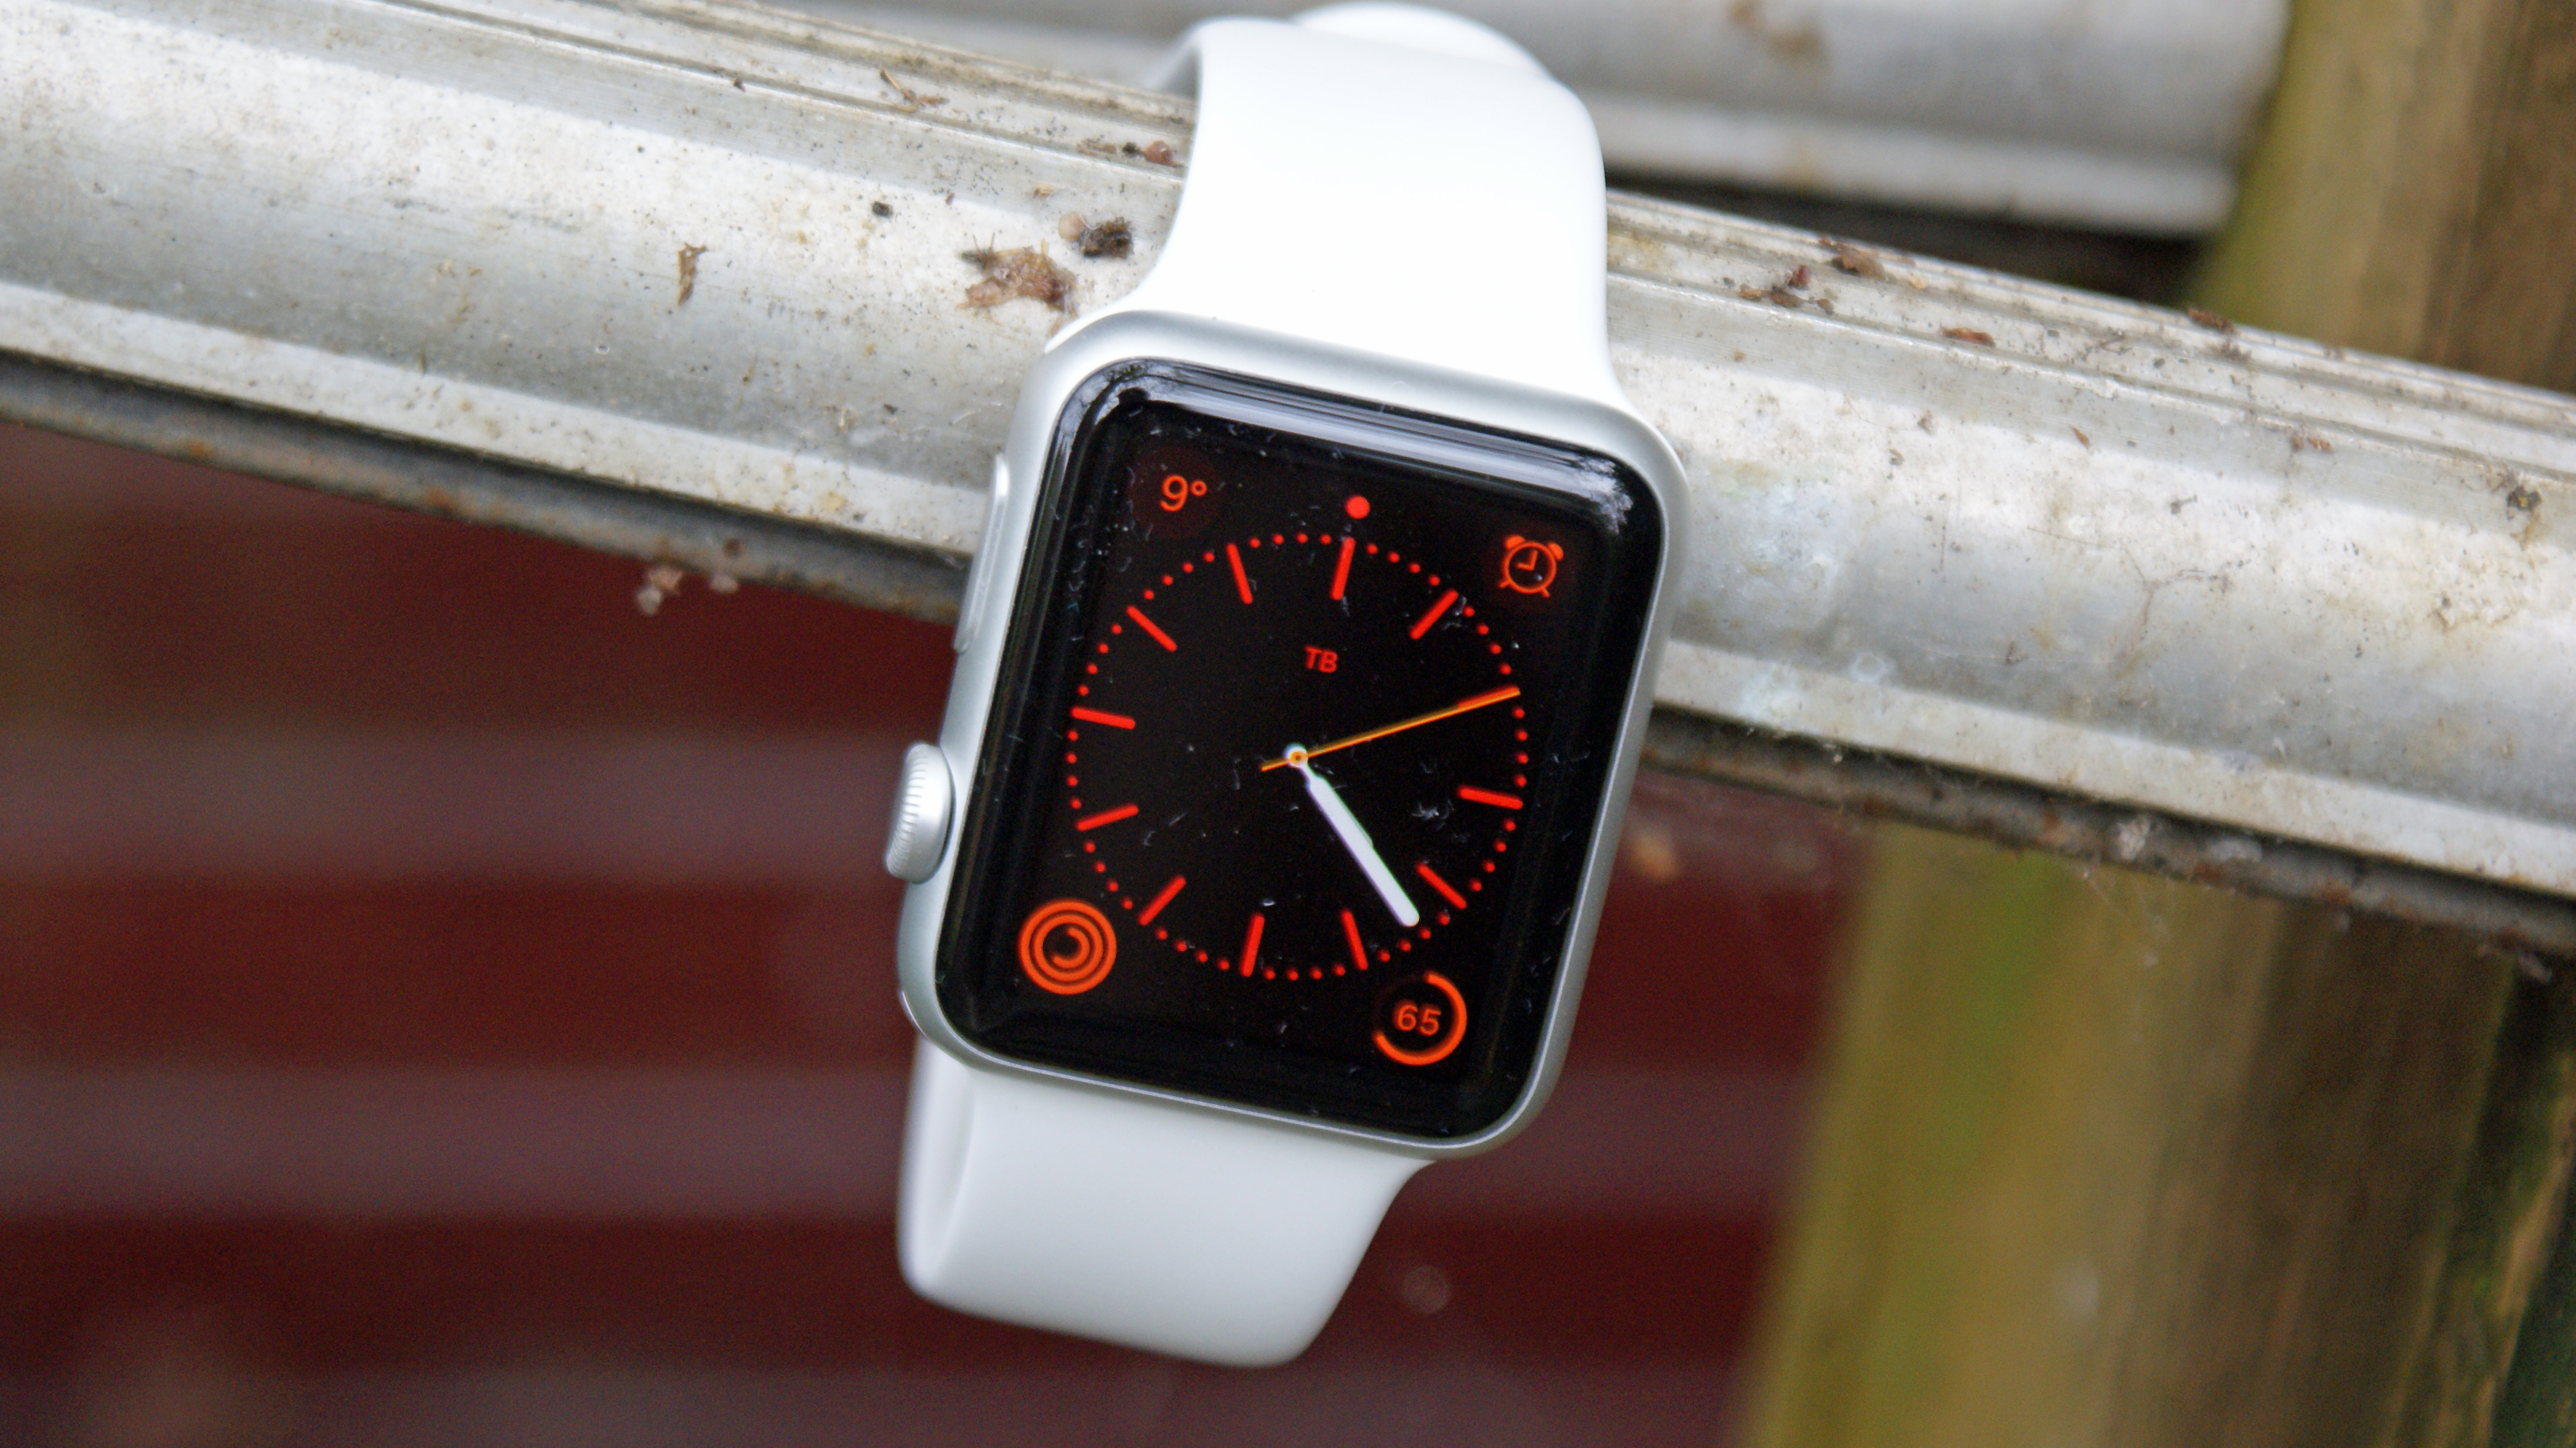 Apple Watch Series 3 Review: The Best Smartwatch to Date in 2018